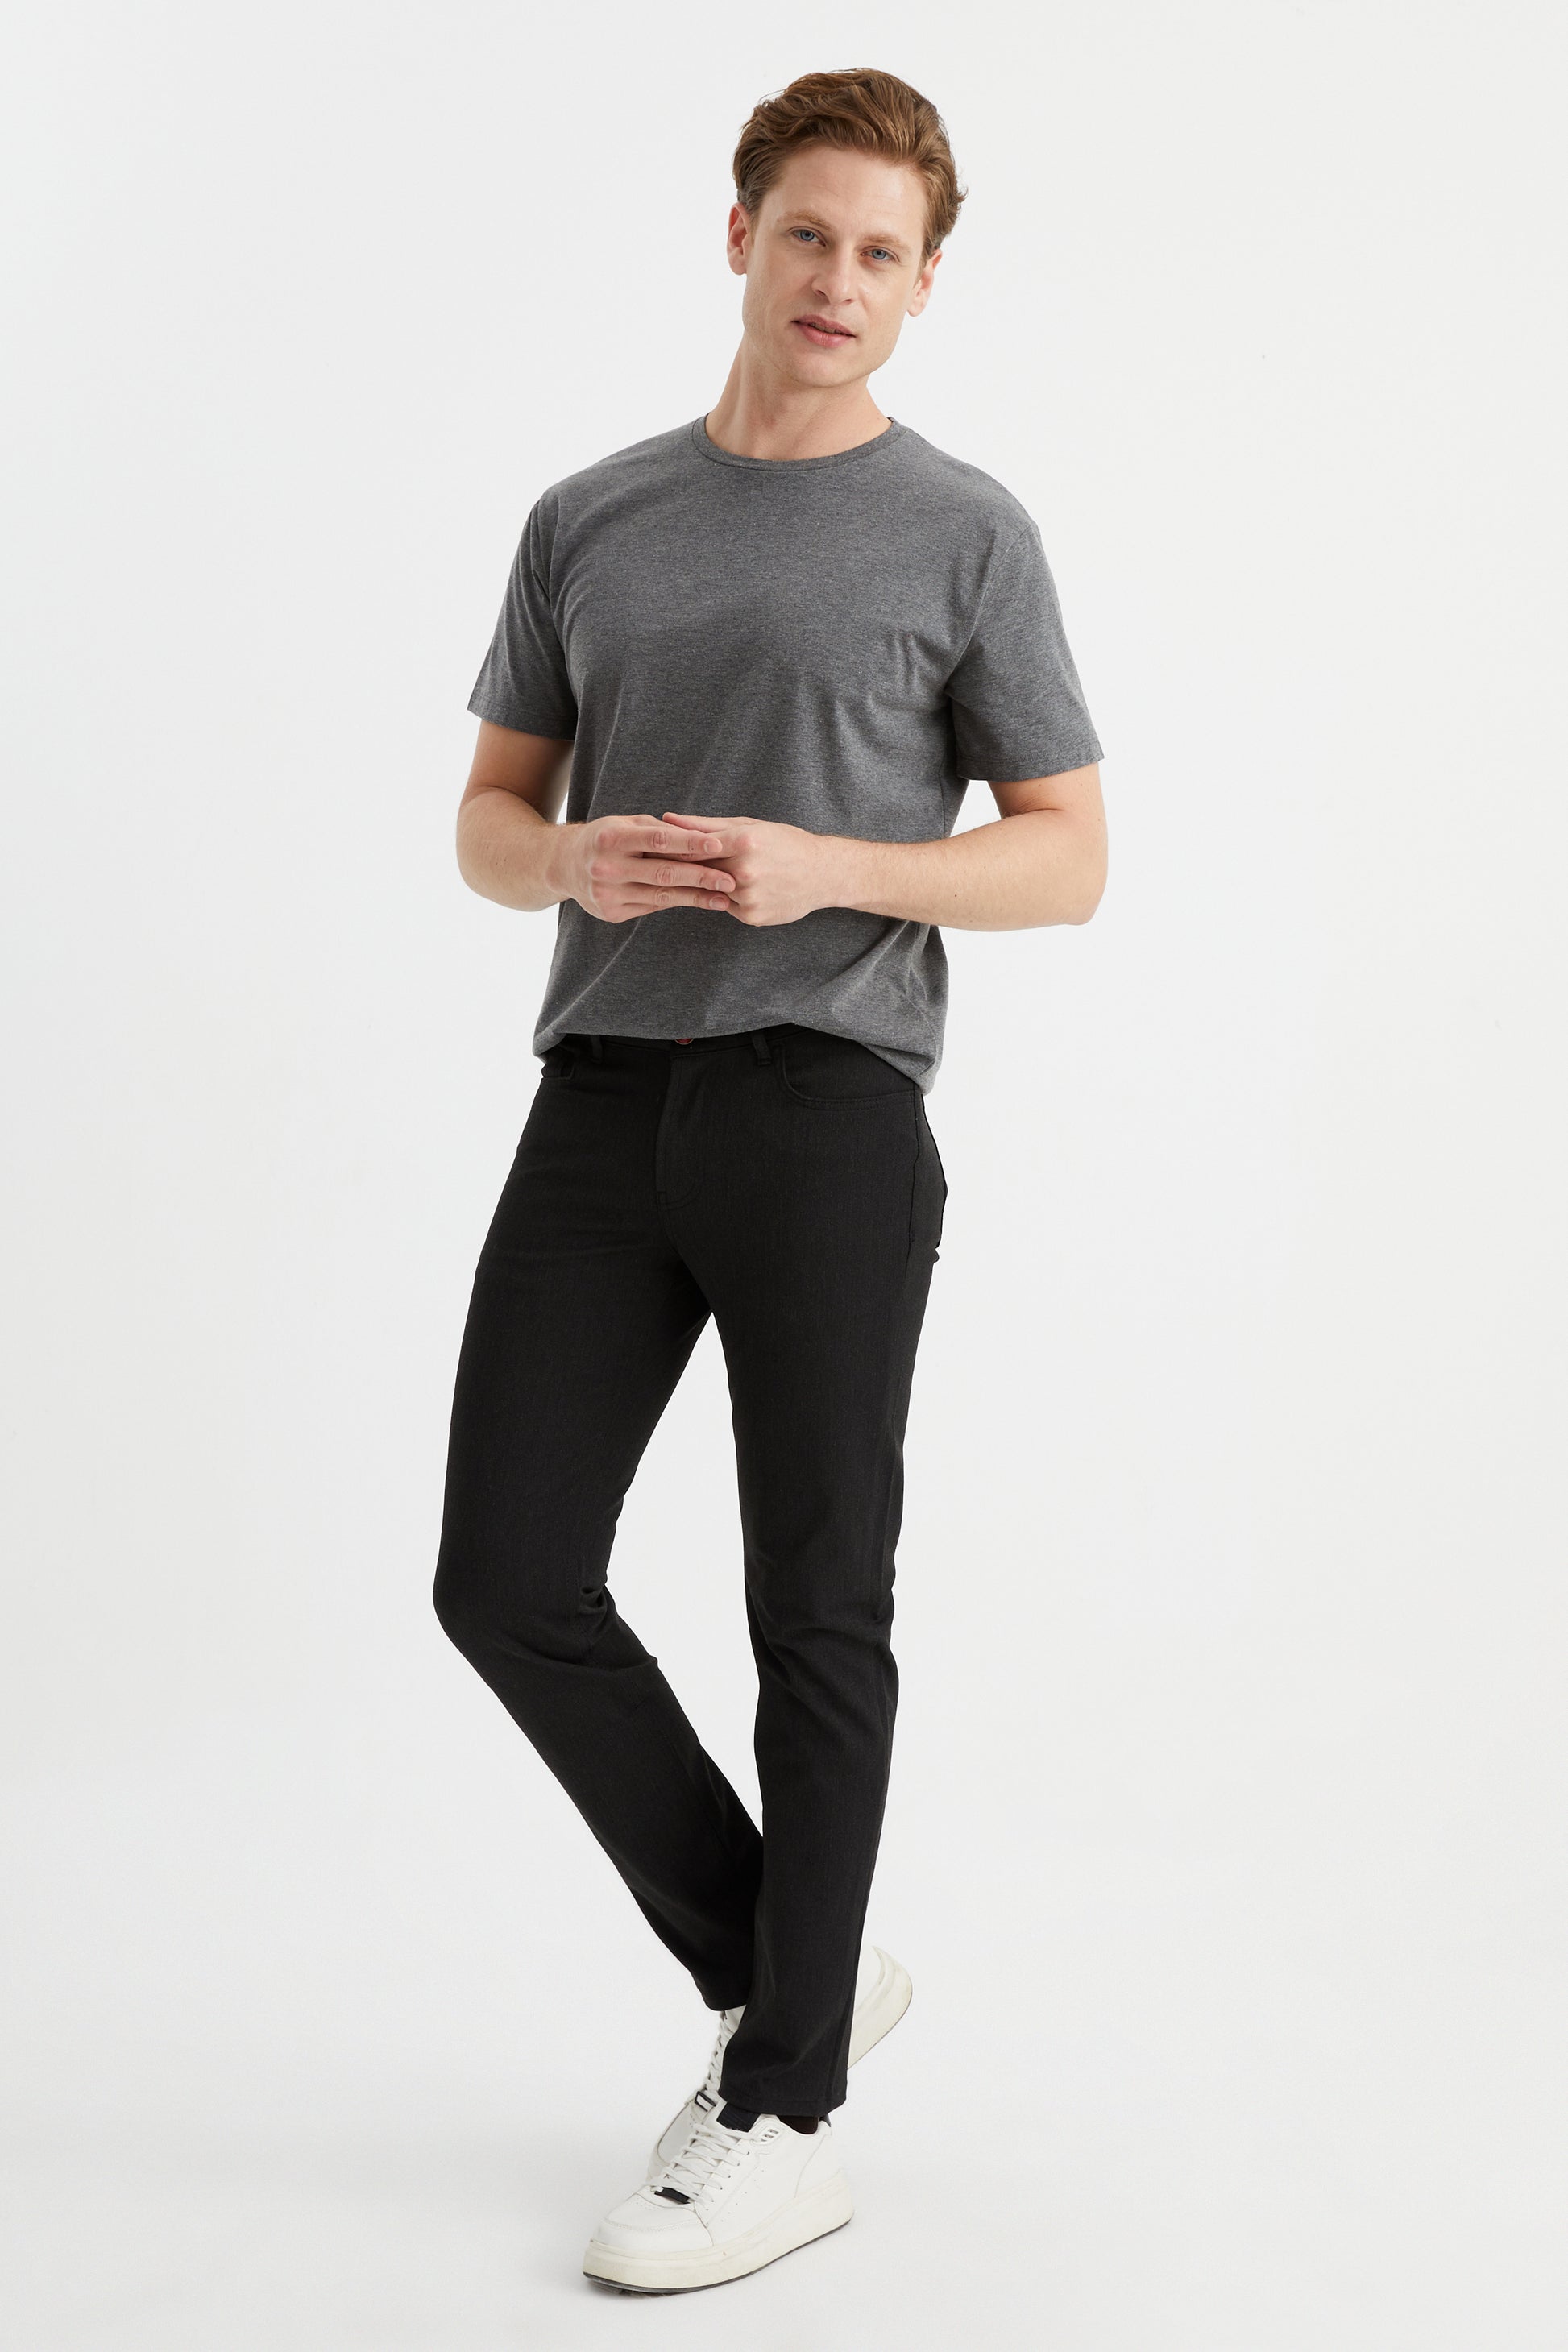 DFR89 men's slim grey dress pants. Wrinkle resistant and stretchy, for the ultimate combination of style and comfort.